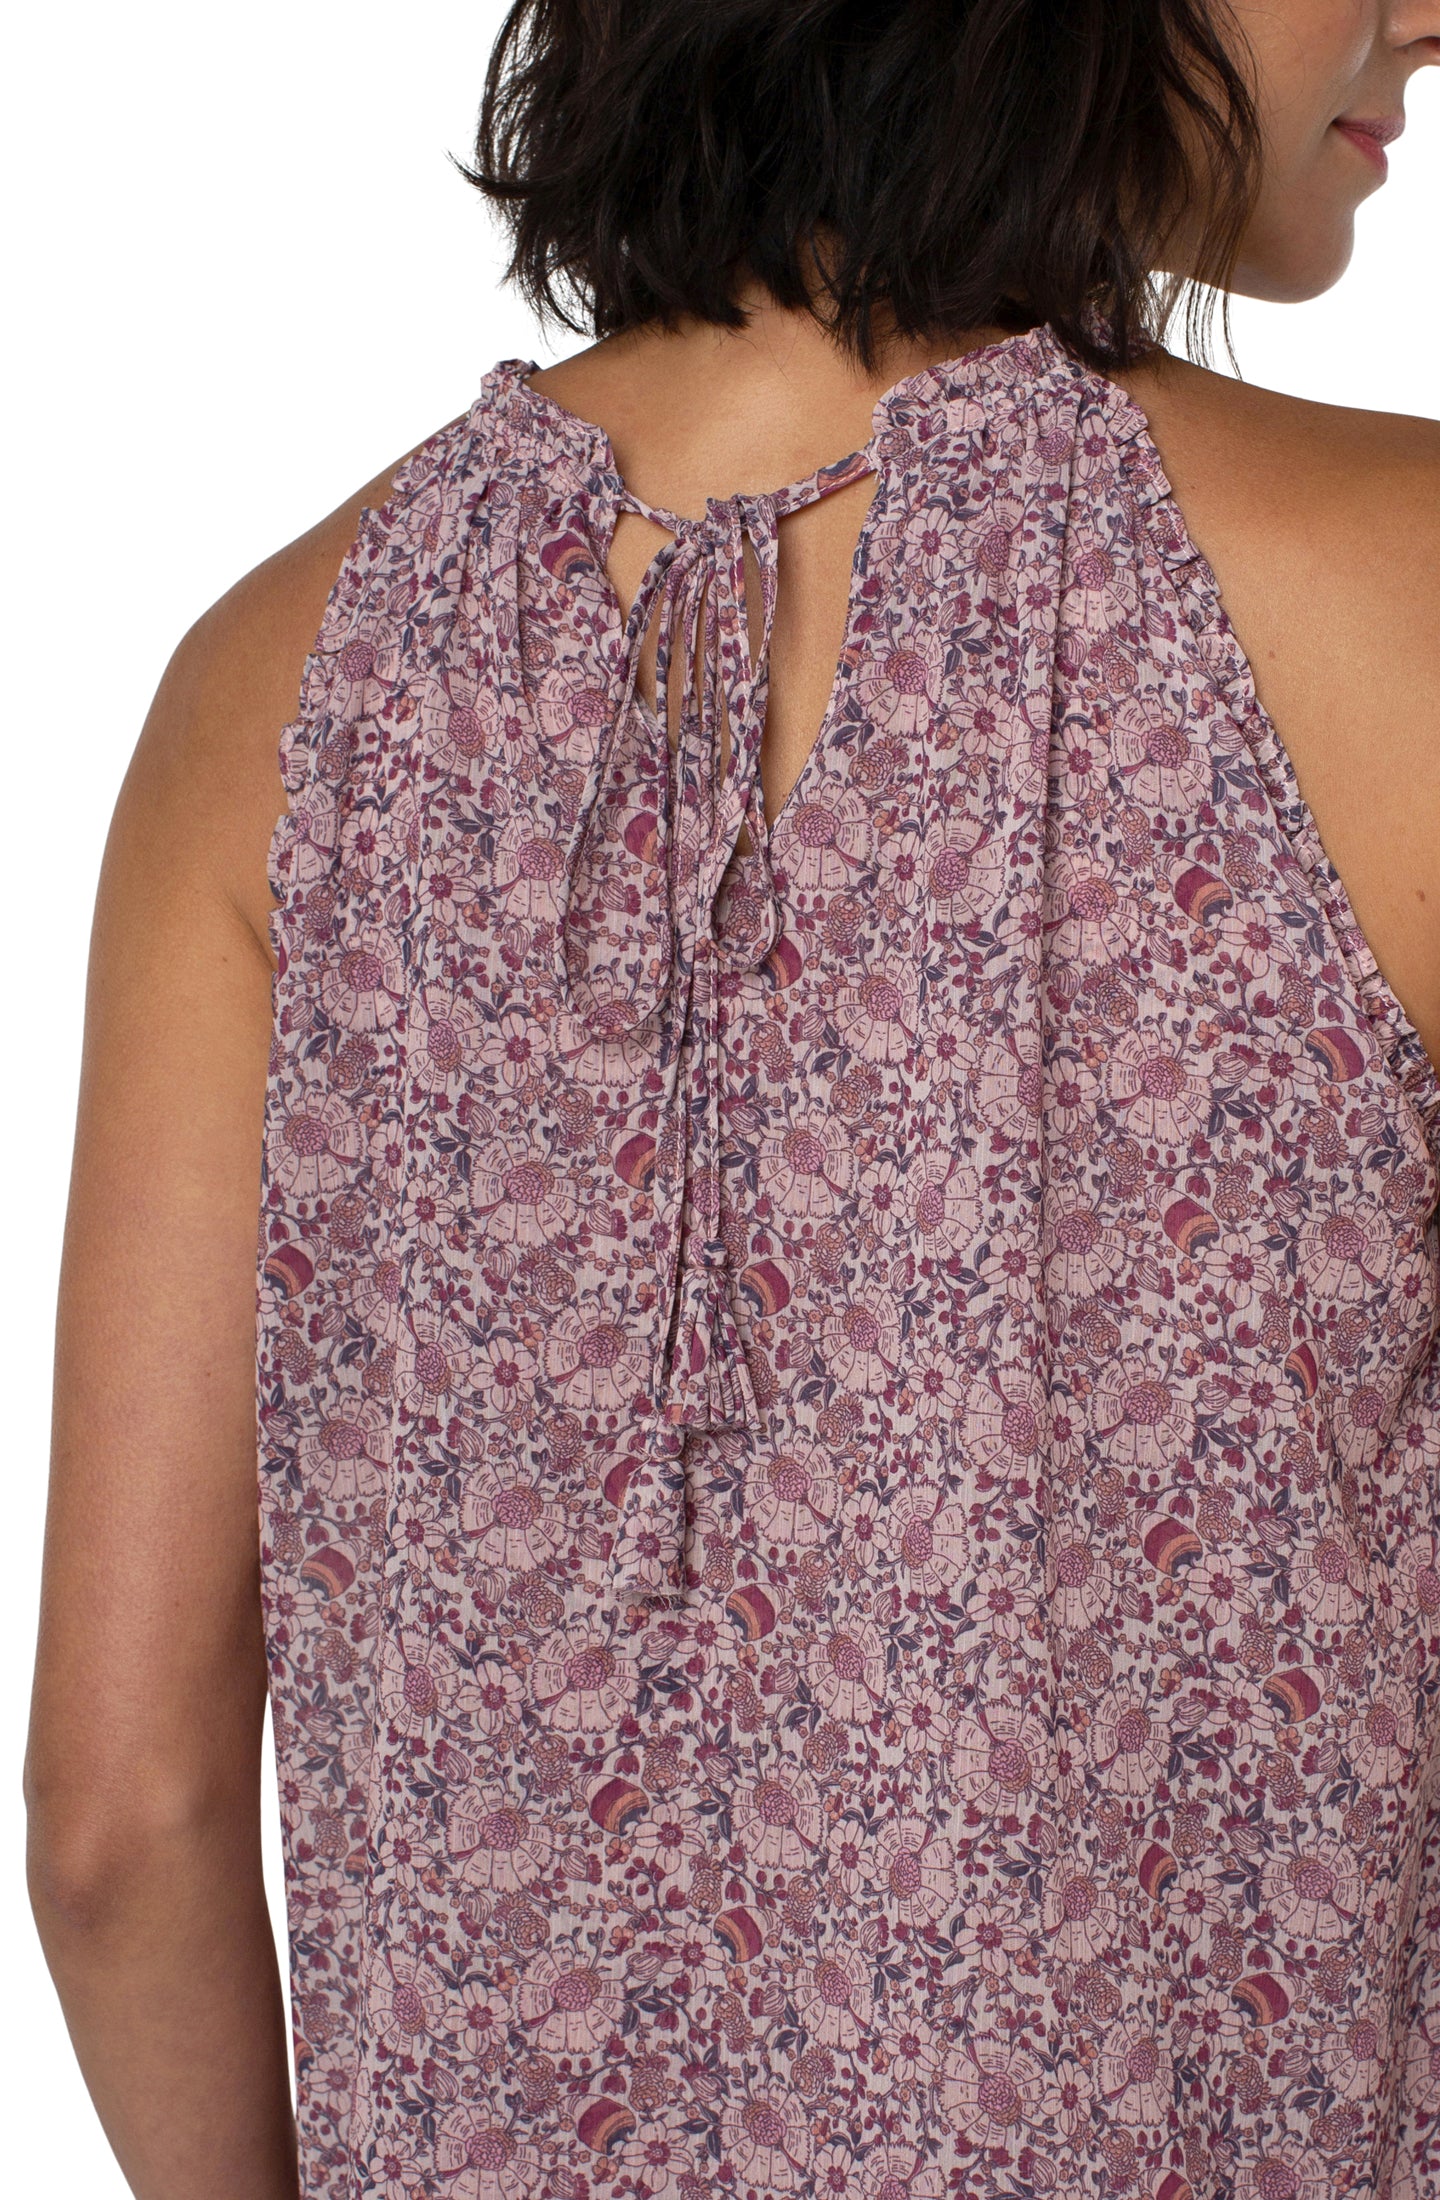 LPLA Wildflower Ditsy Blouse. SMALL